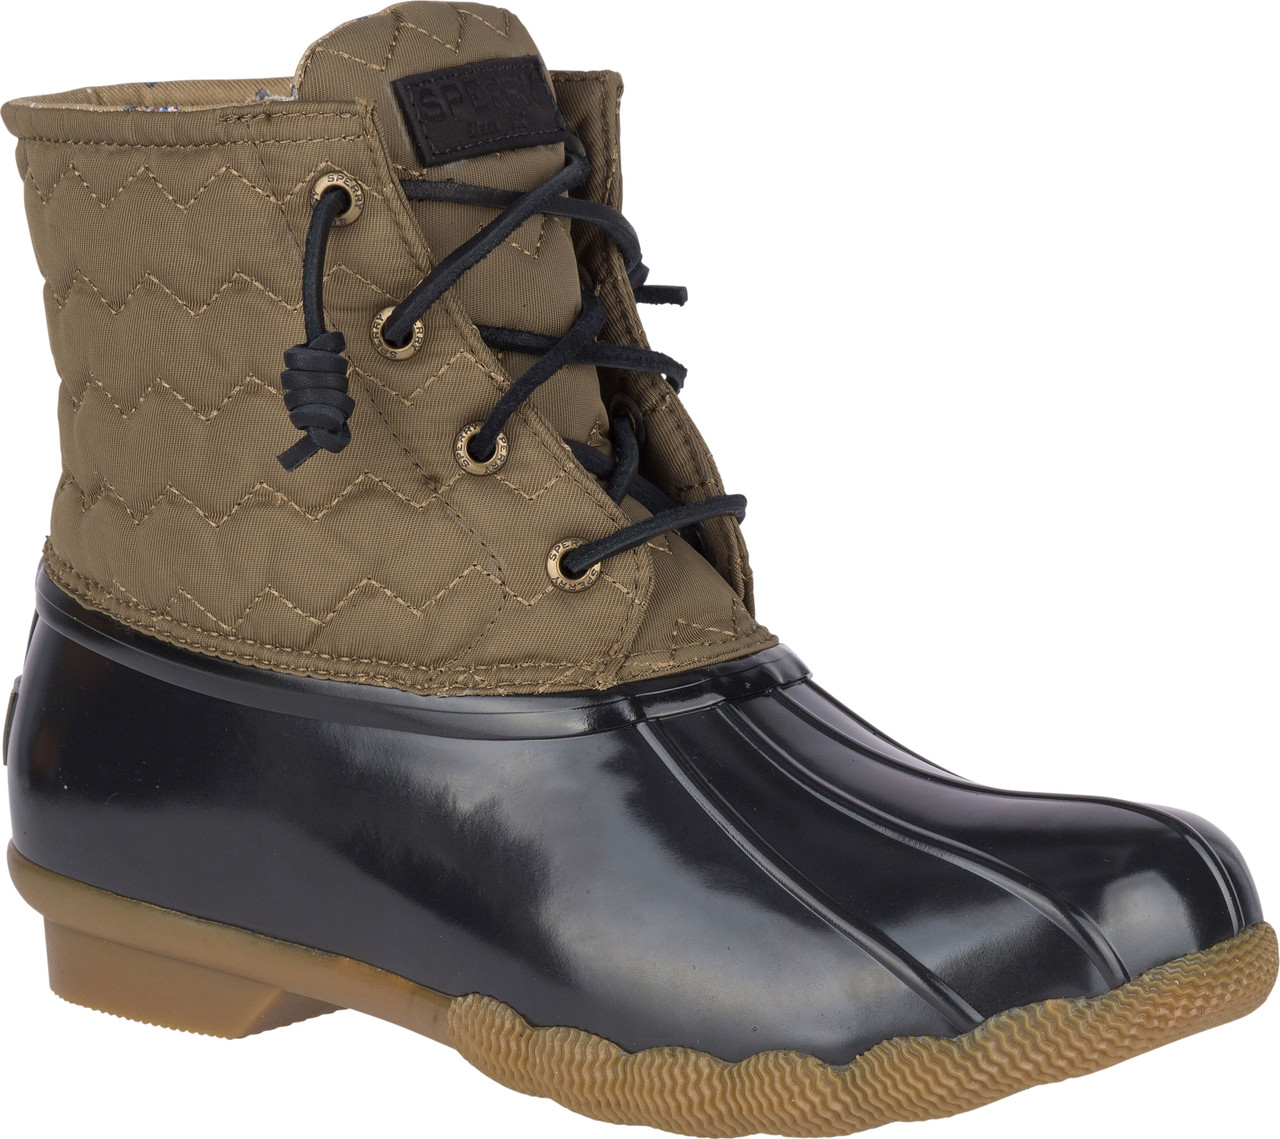 Sperry Womens Saltwater Shiny Quilted Rain Boot